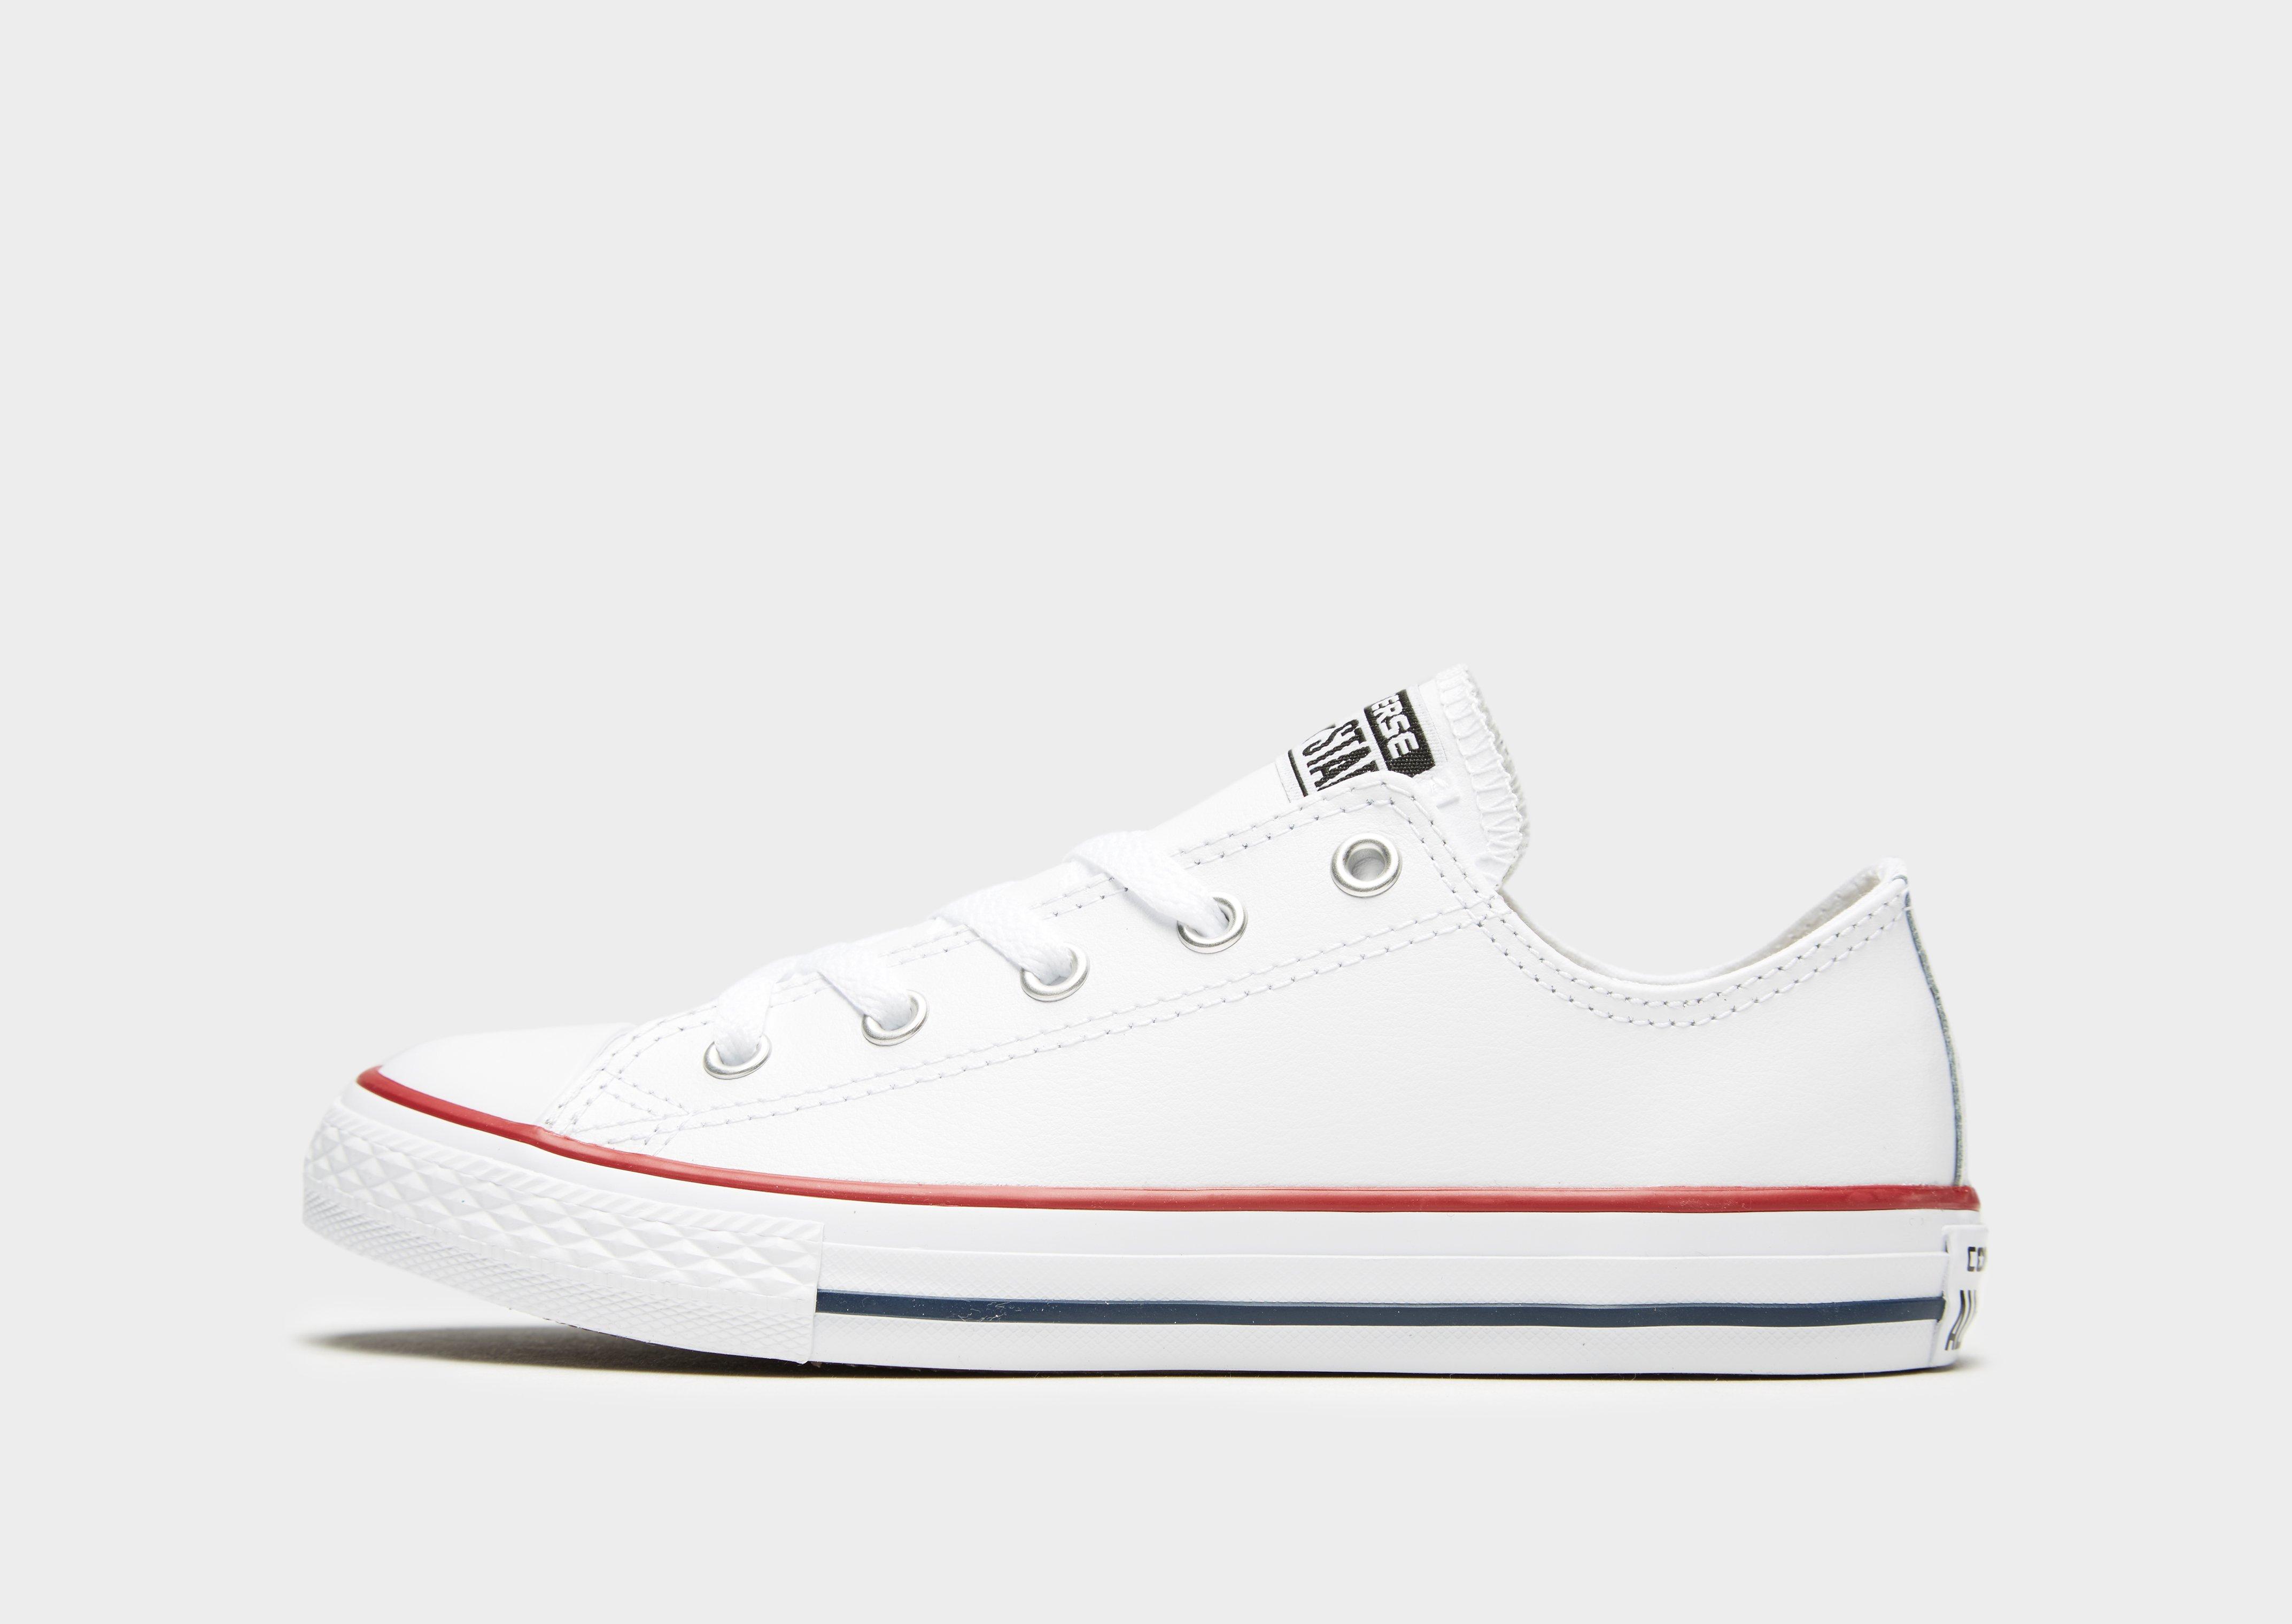 childrens white leather converse